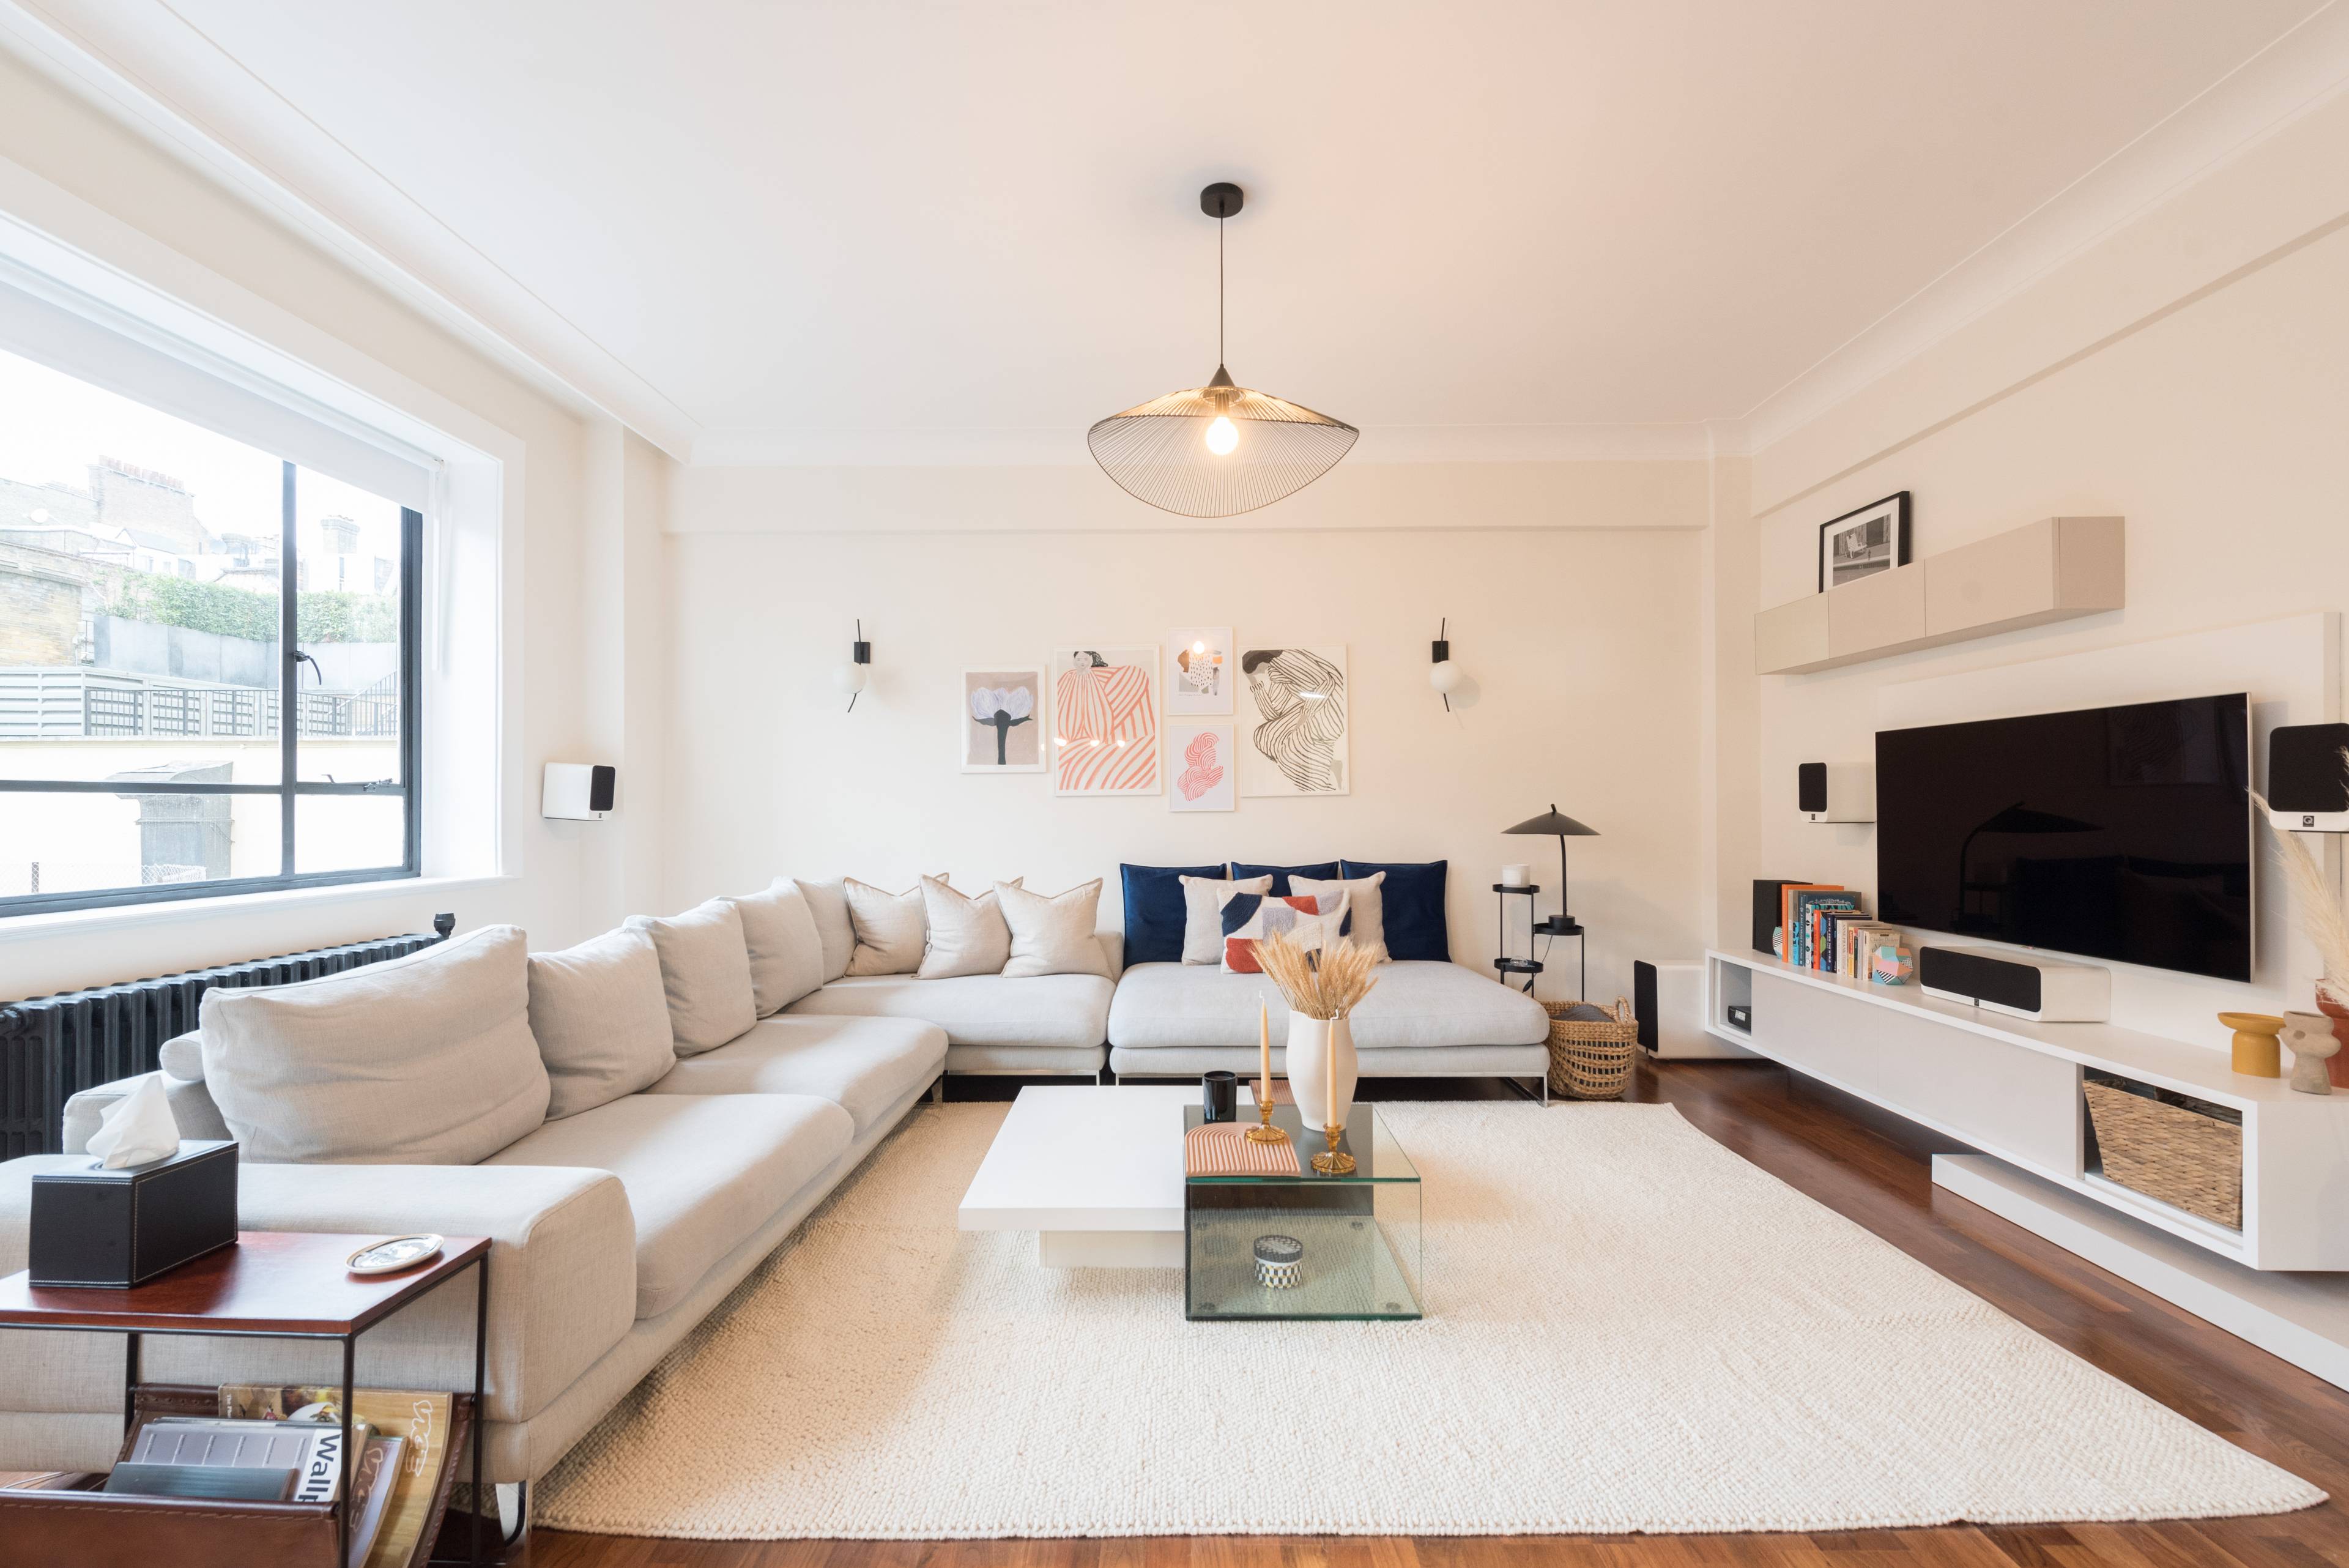 A newly refurbished two-bedroom, two-bathroom apartment located on Portland Place, Marylebone.